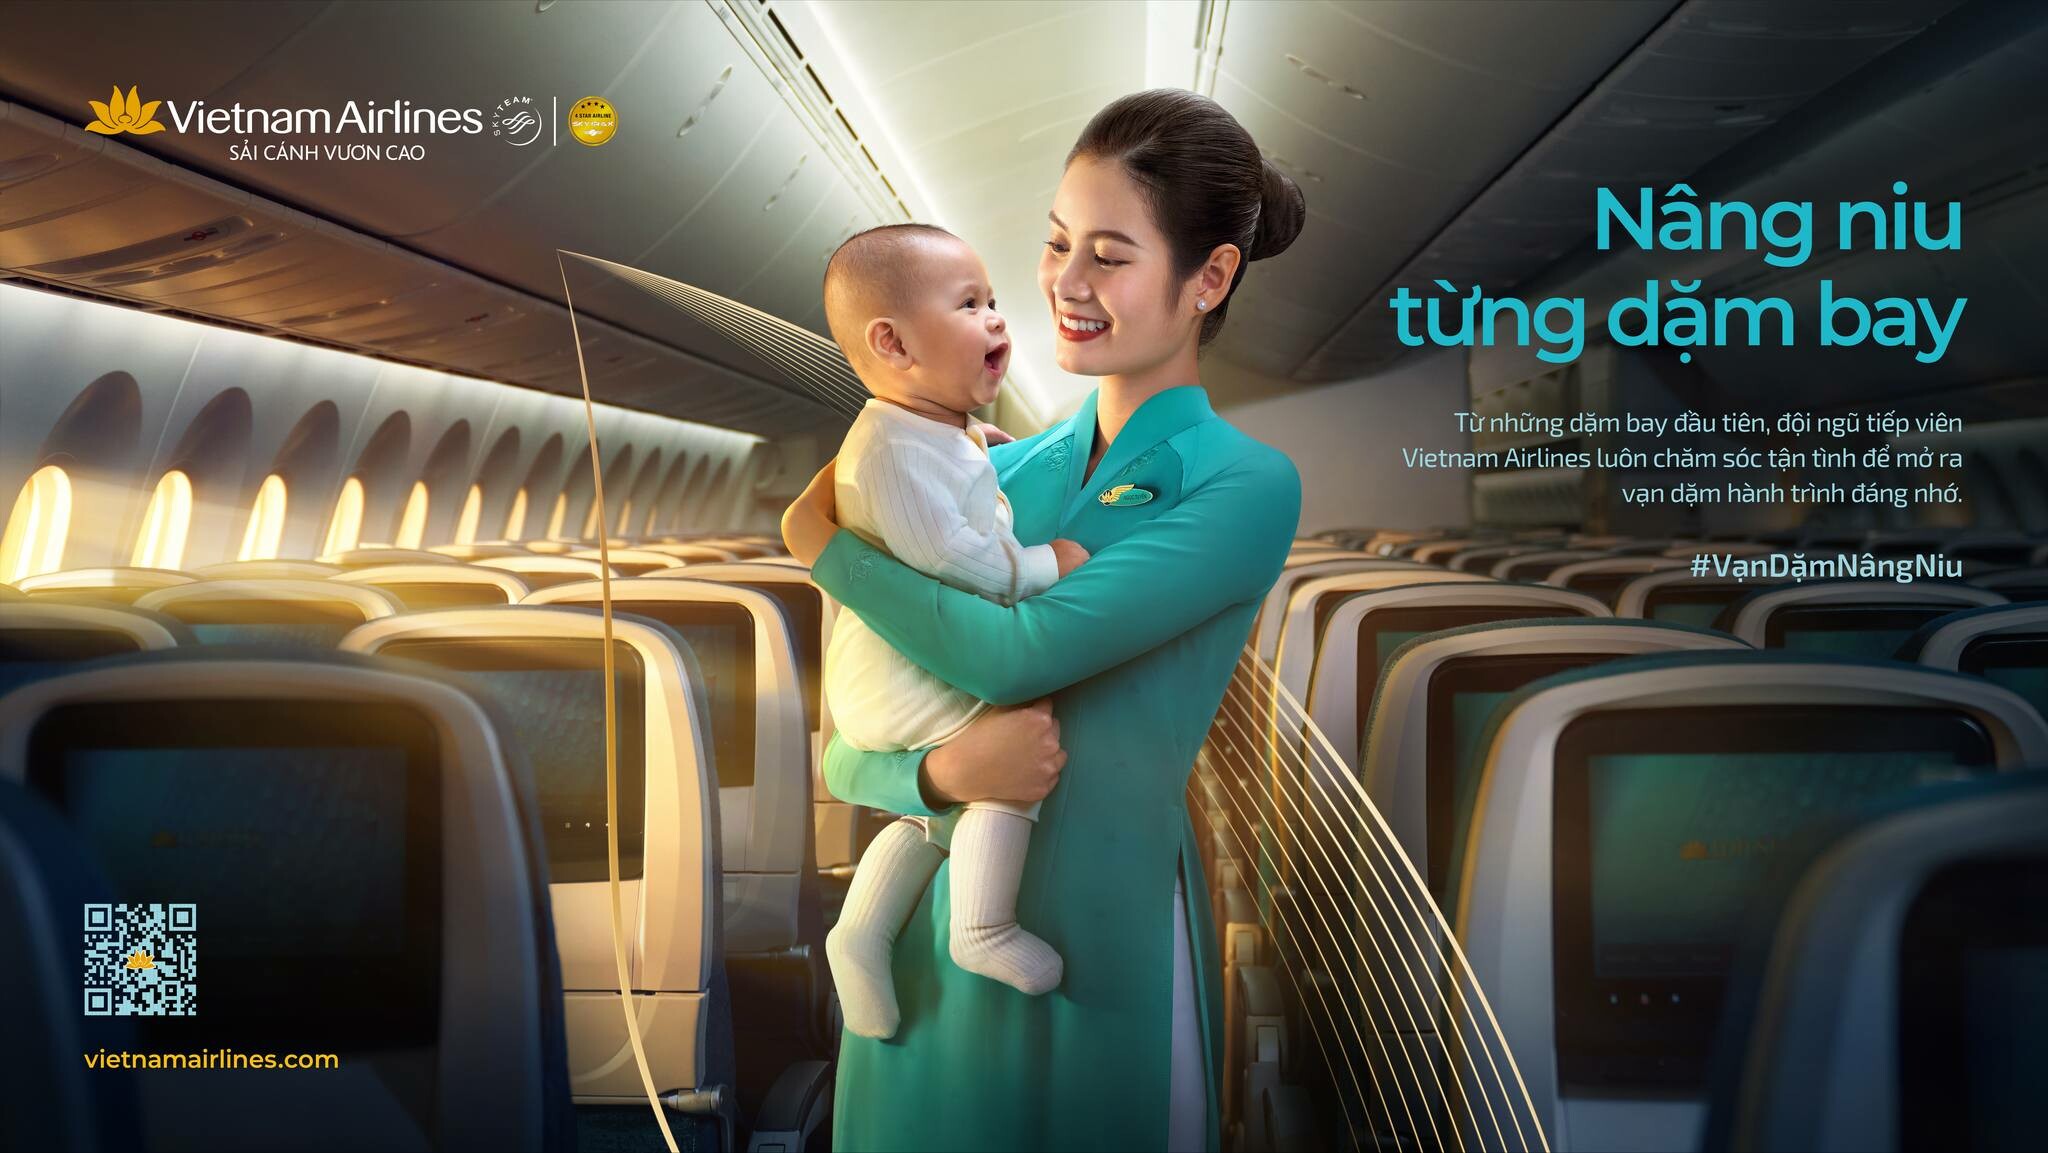 Cover image for Vietnam Airlines